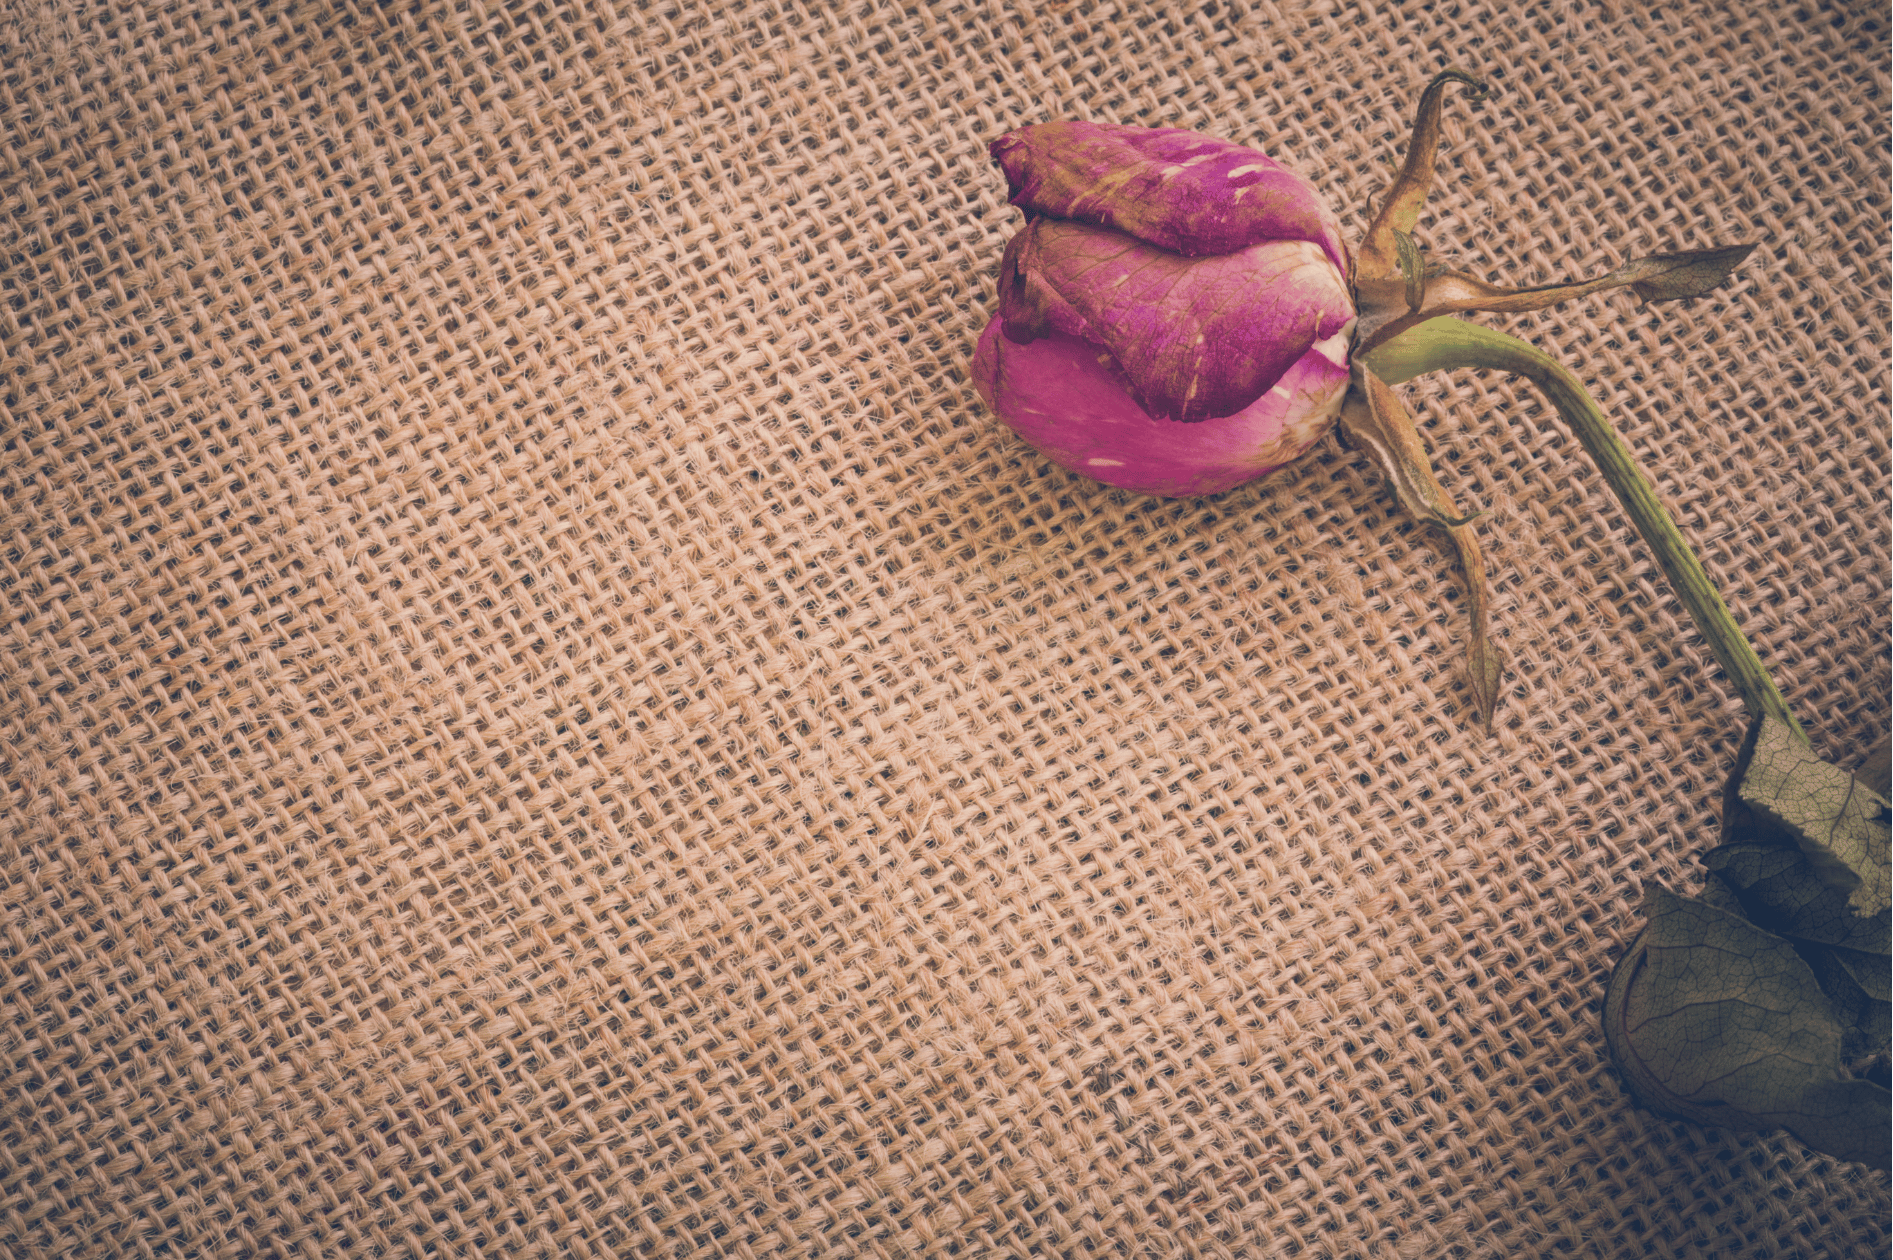 Dry red rose on sackcloth